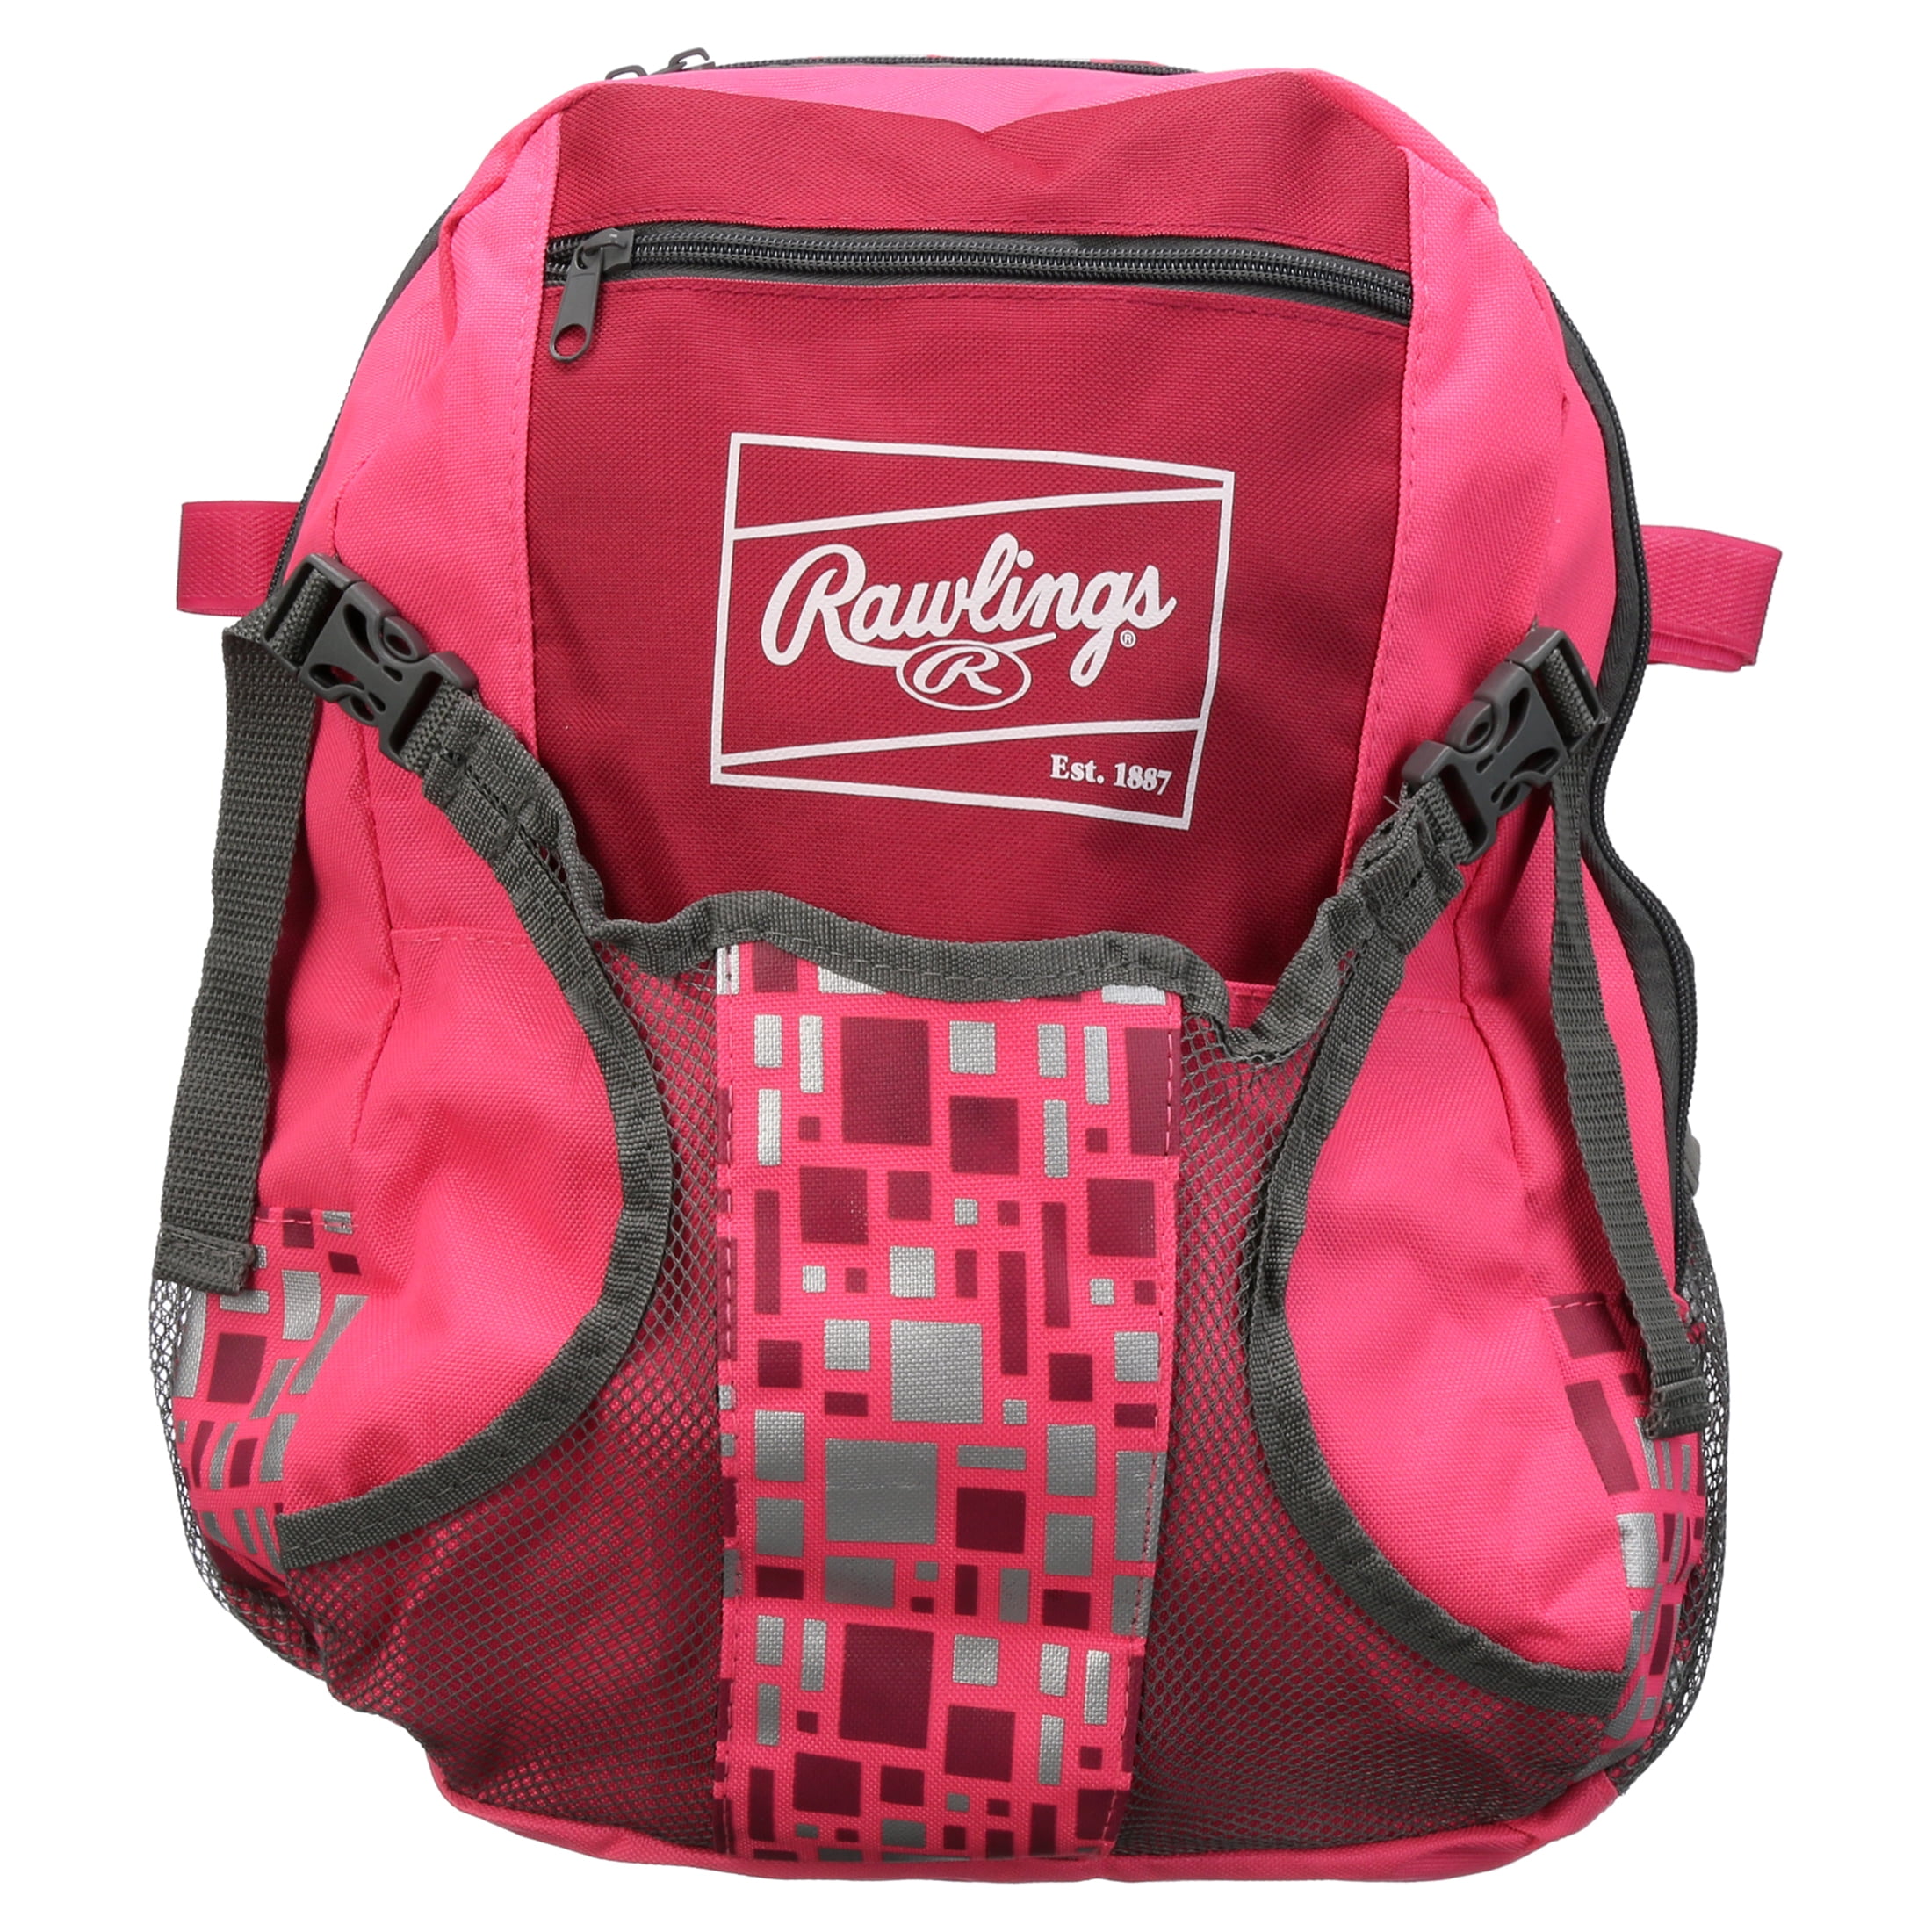 Rawlings 2022 Players Youth Tball Backpack Equipment Bag, Pink